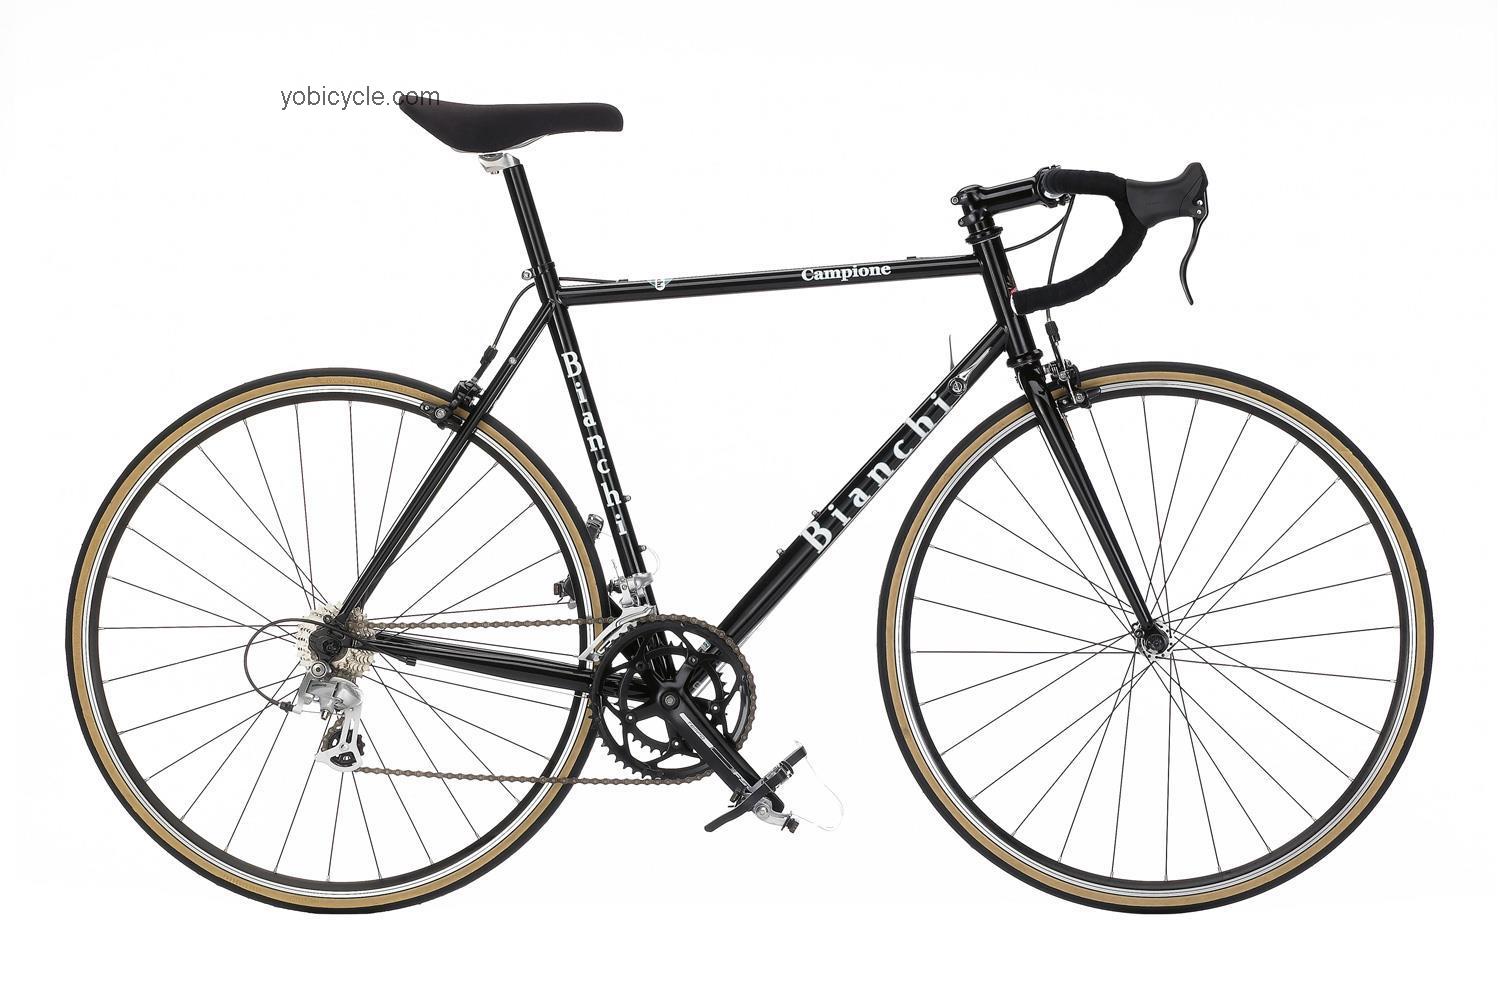 Bianchi Campione competitors and comparison tool online specs and performance